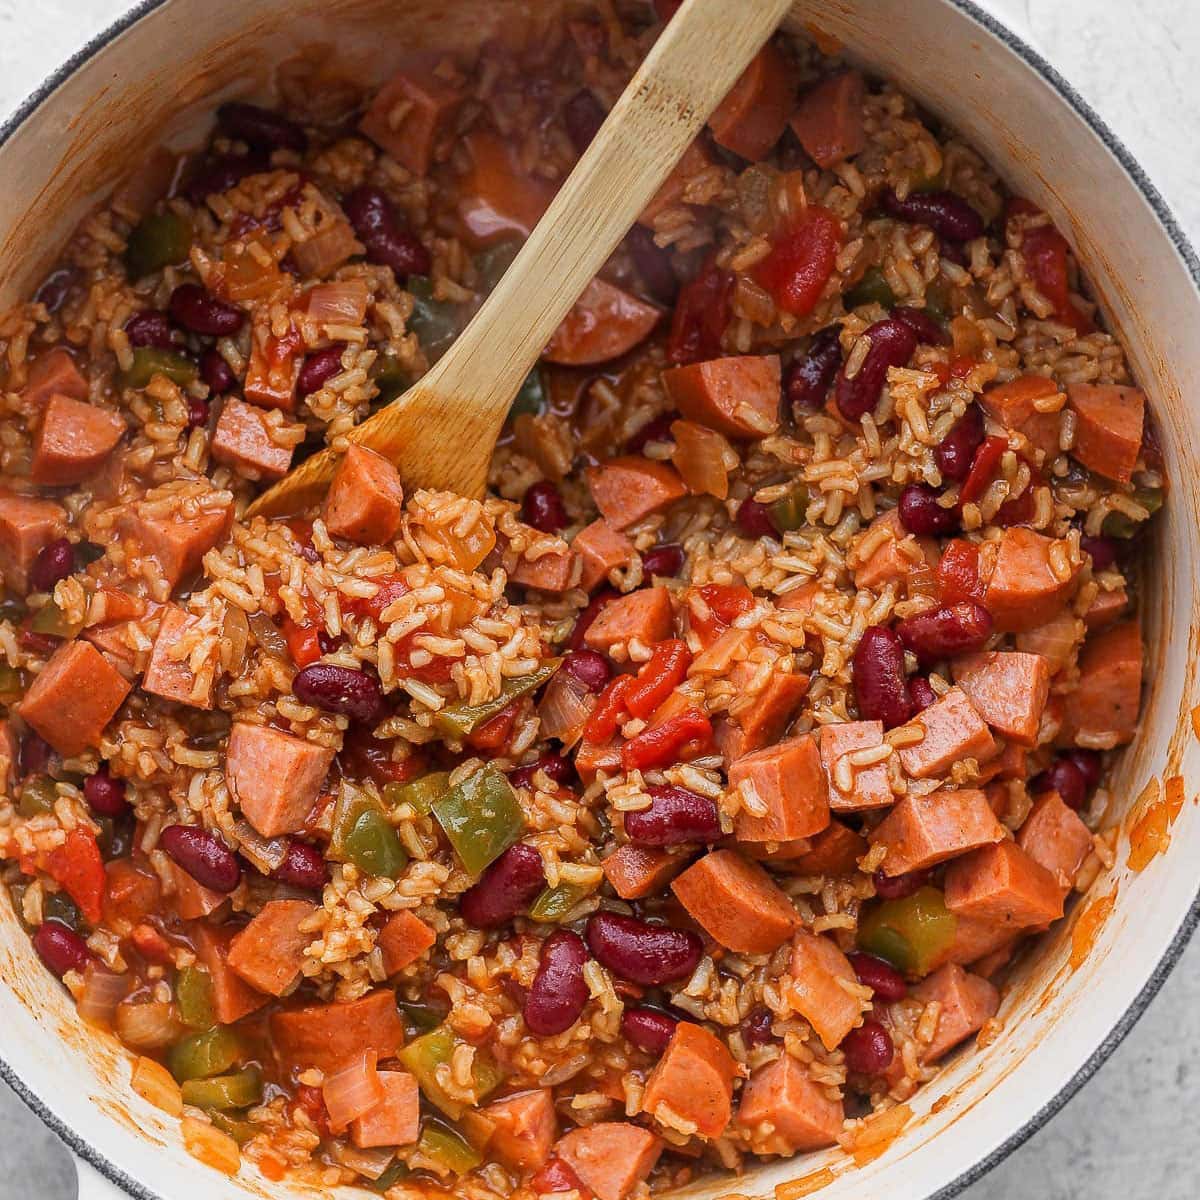 https://fitfoodiefinds.com/wp-content/uploads/2020/12/red-beans-and-rice-8.jpg